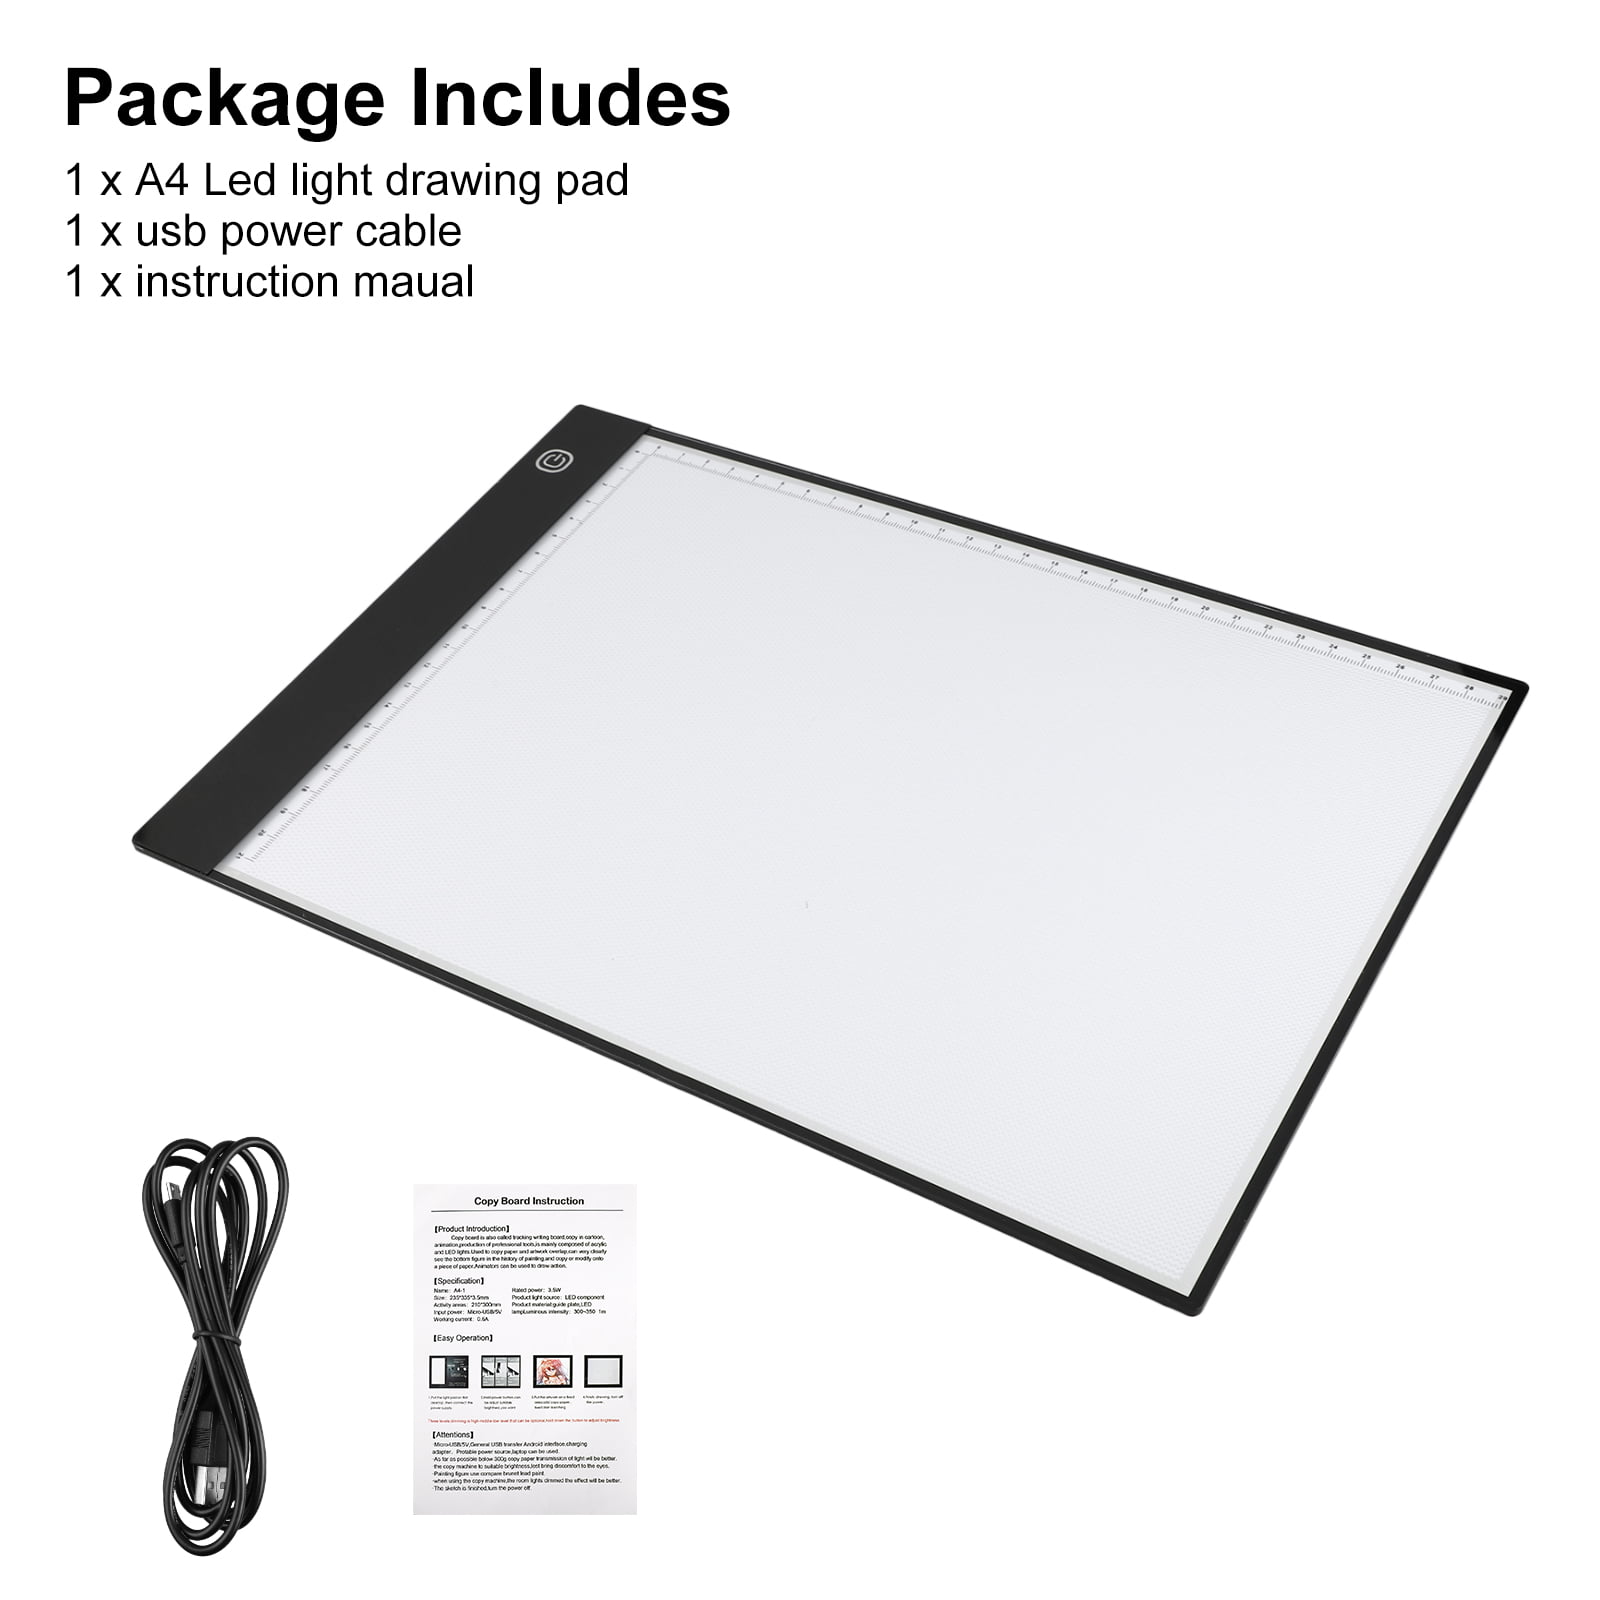 A4 Light Box for Tracing Portable Battery Power Cable 5600 Lux Dimmable Brightness LED Artcraft Tracing Light Pad for Artists Drawing Animation Stencilling X-rayViewing Light Box 